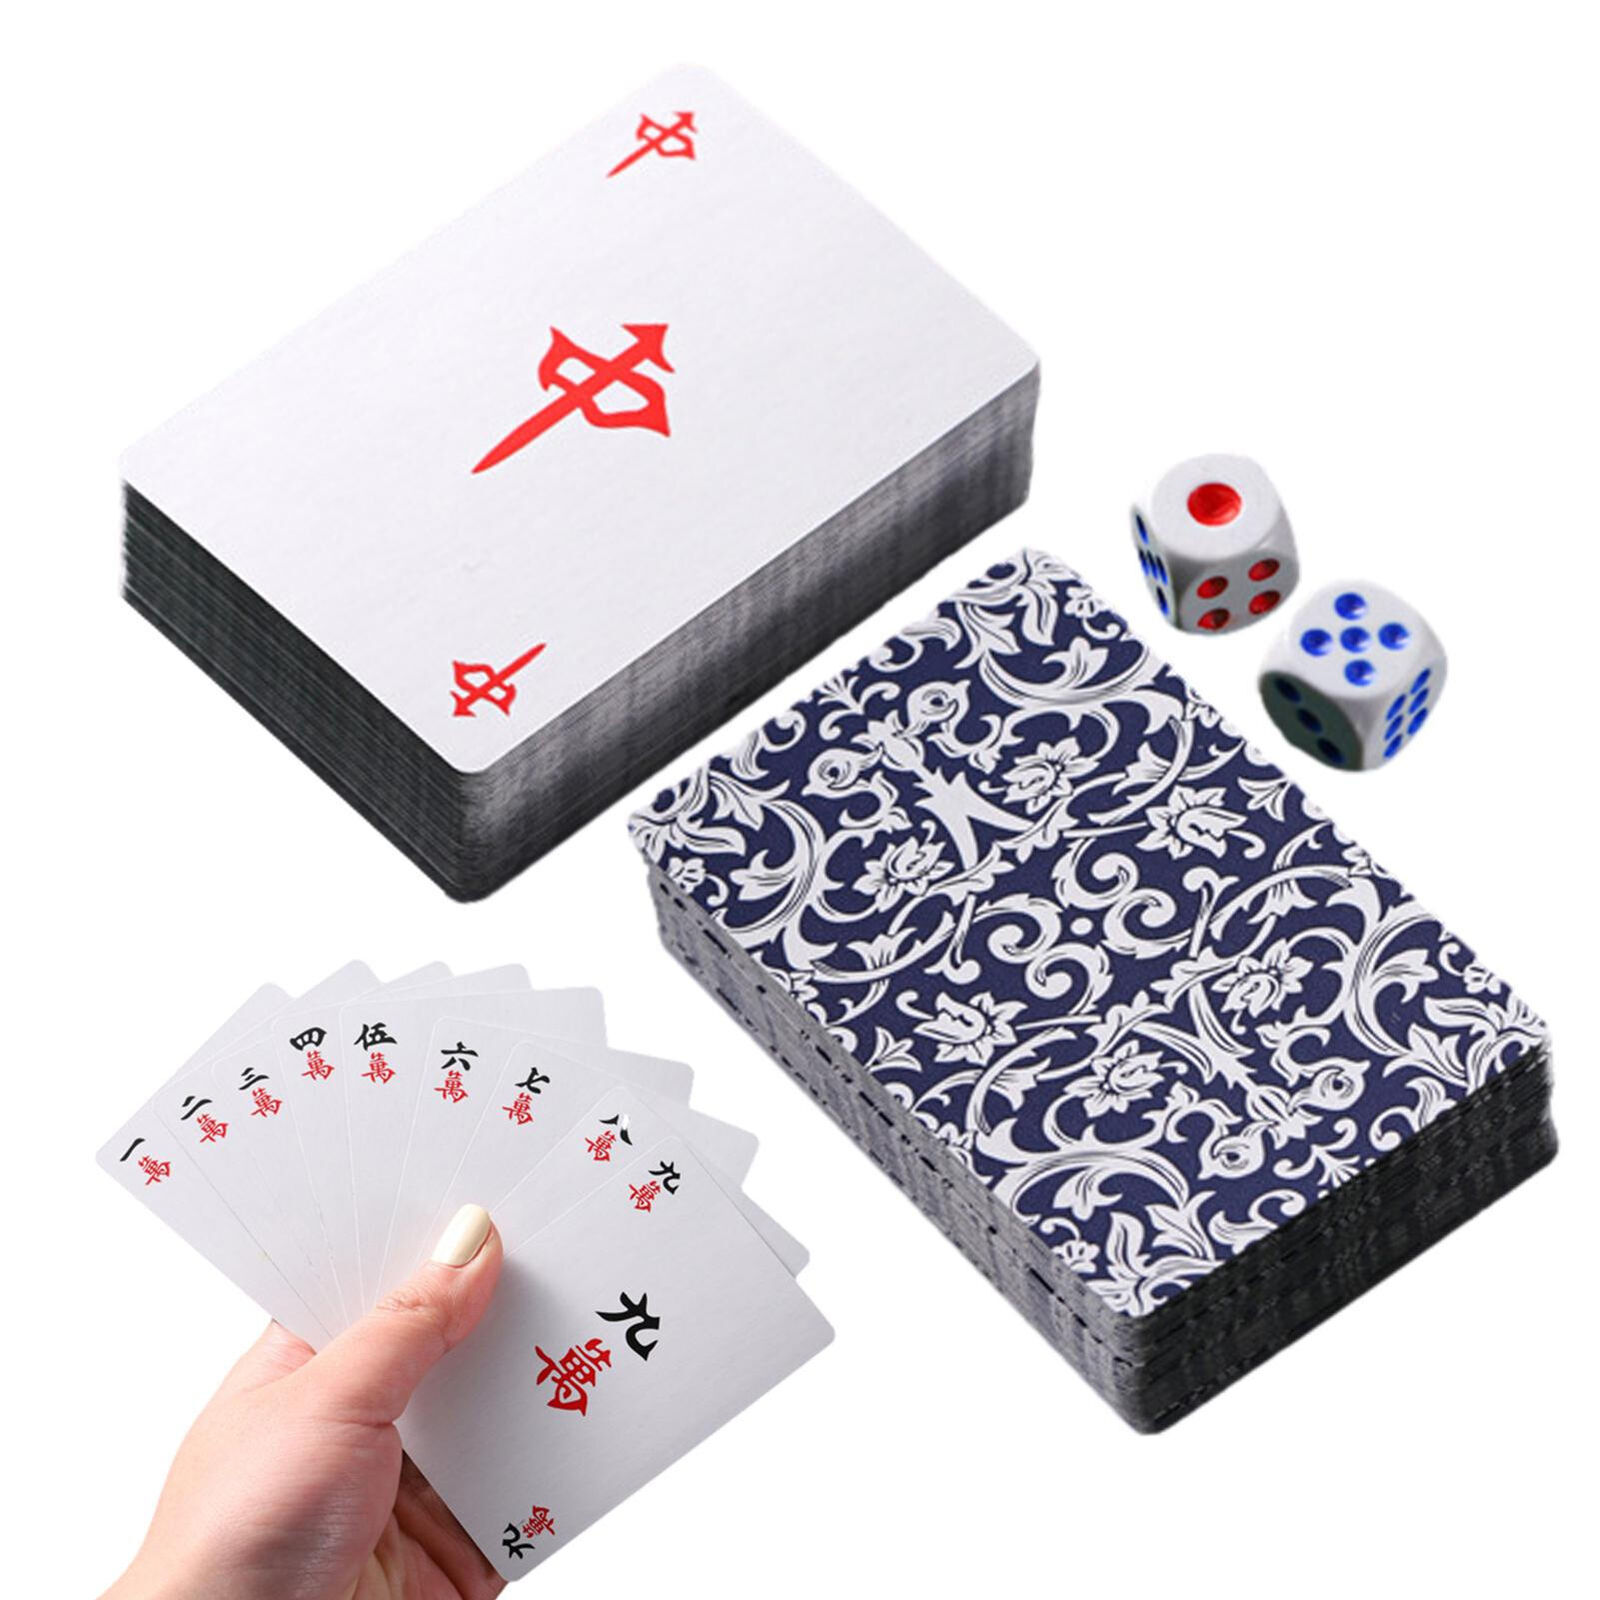 144* 86*56mm Thicken Mahjong Cards Chinese Traditional Board Game With Dice